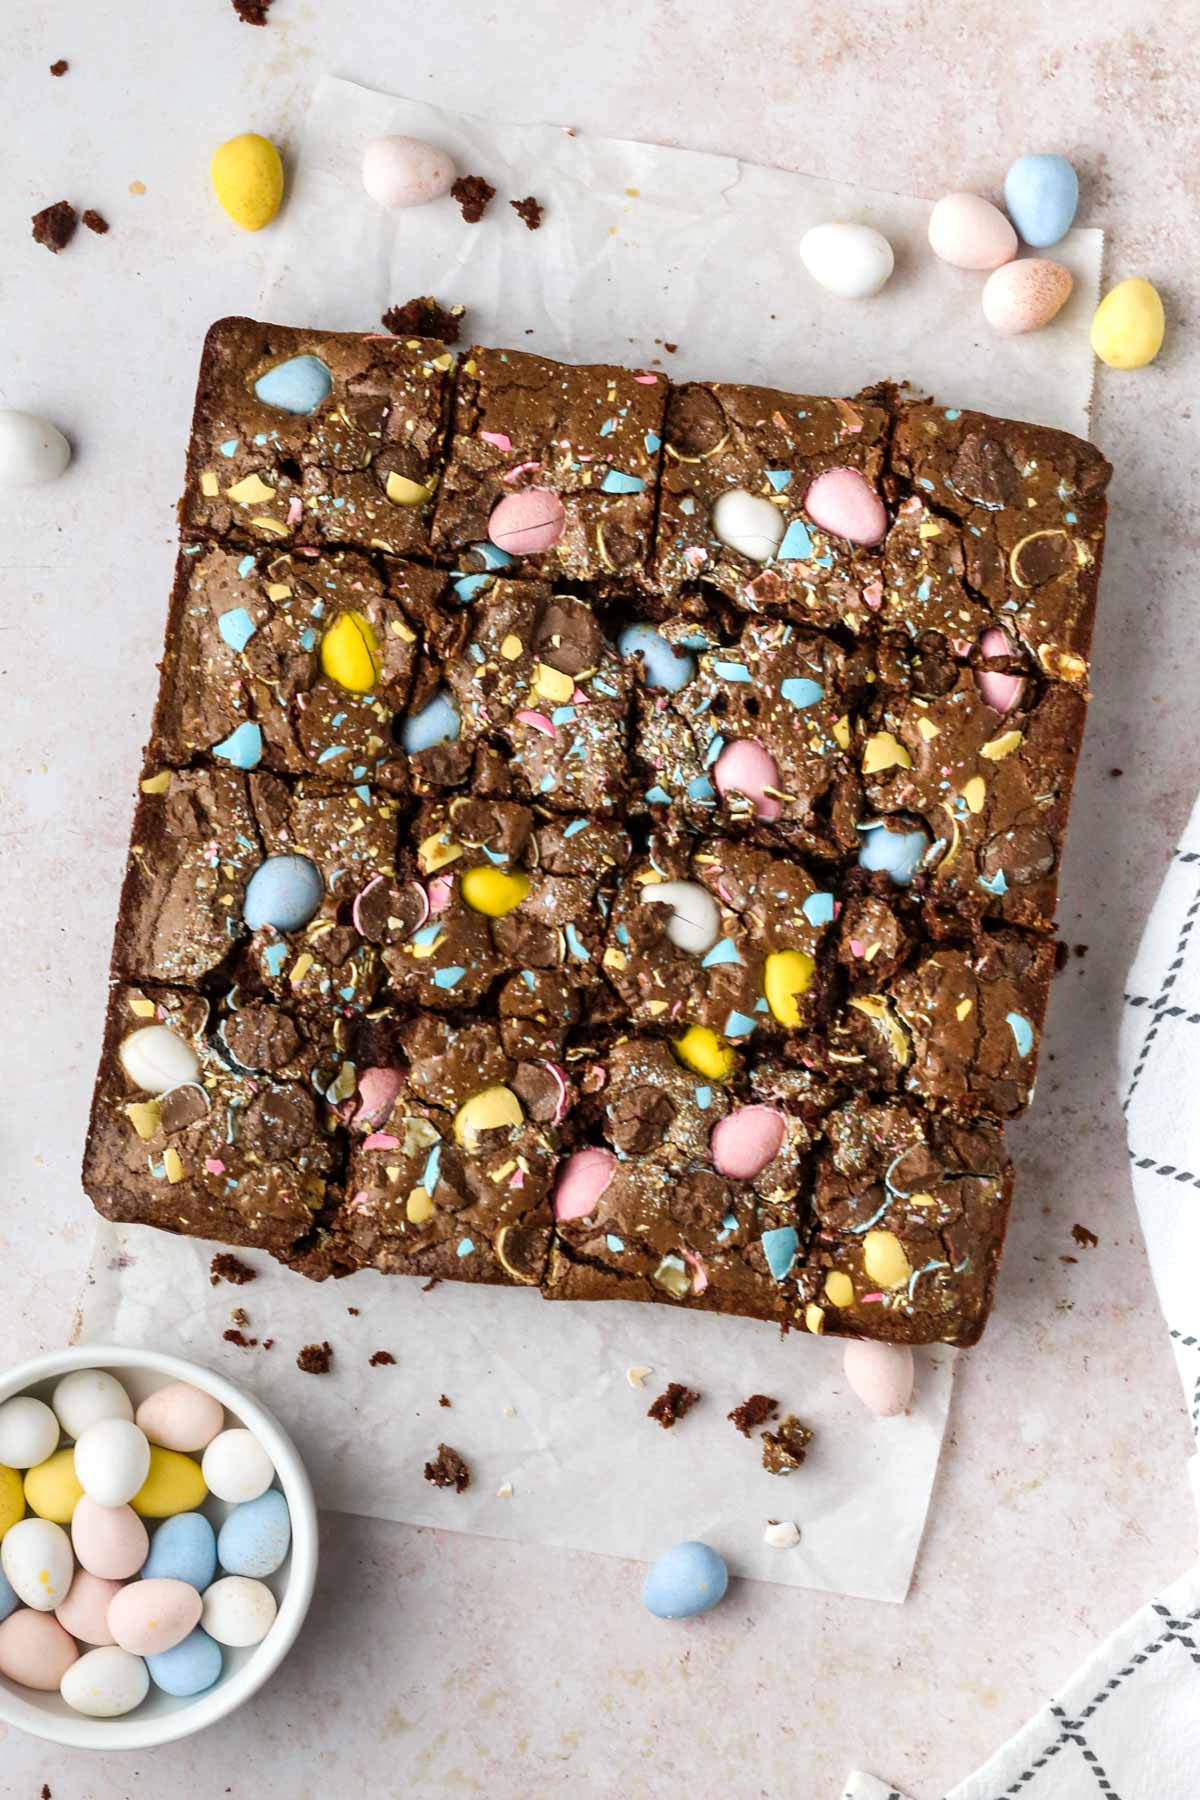 Overhead view of chocolate mini egg brownies sliced into squares on parchment paper.